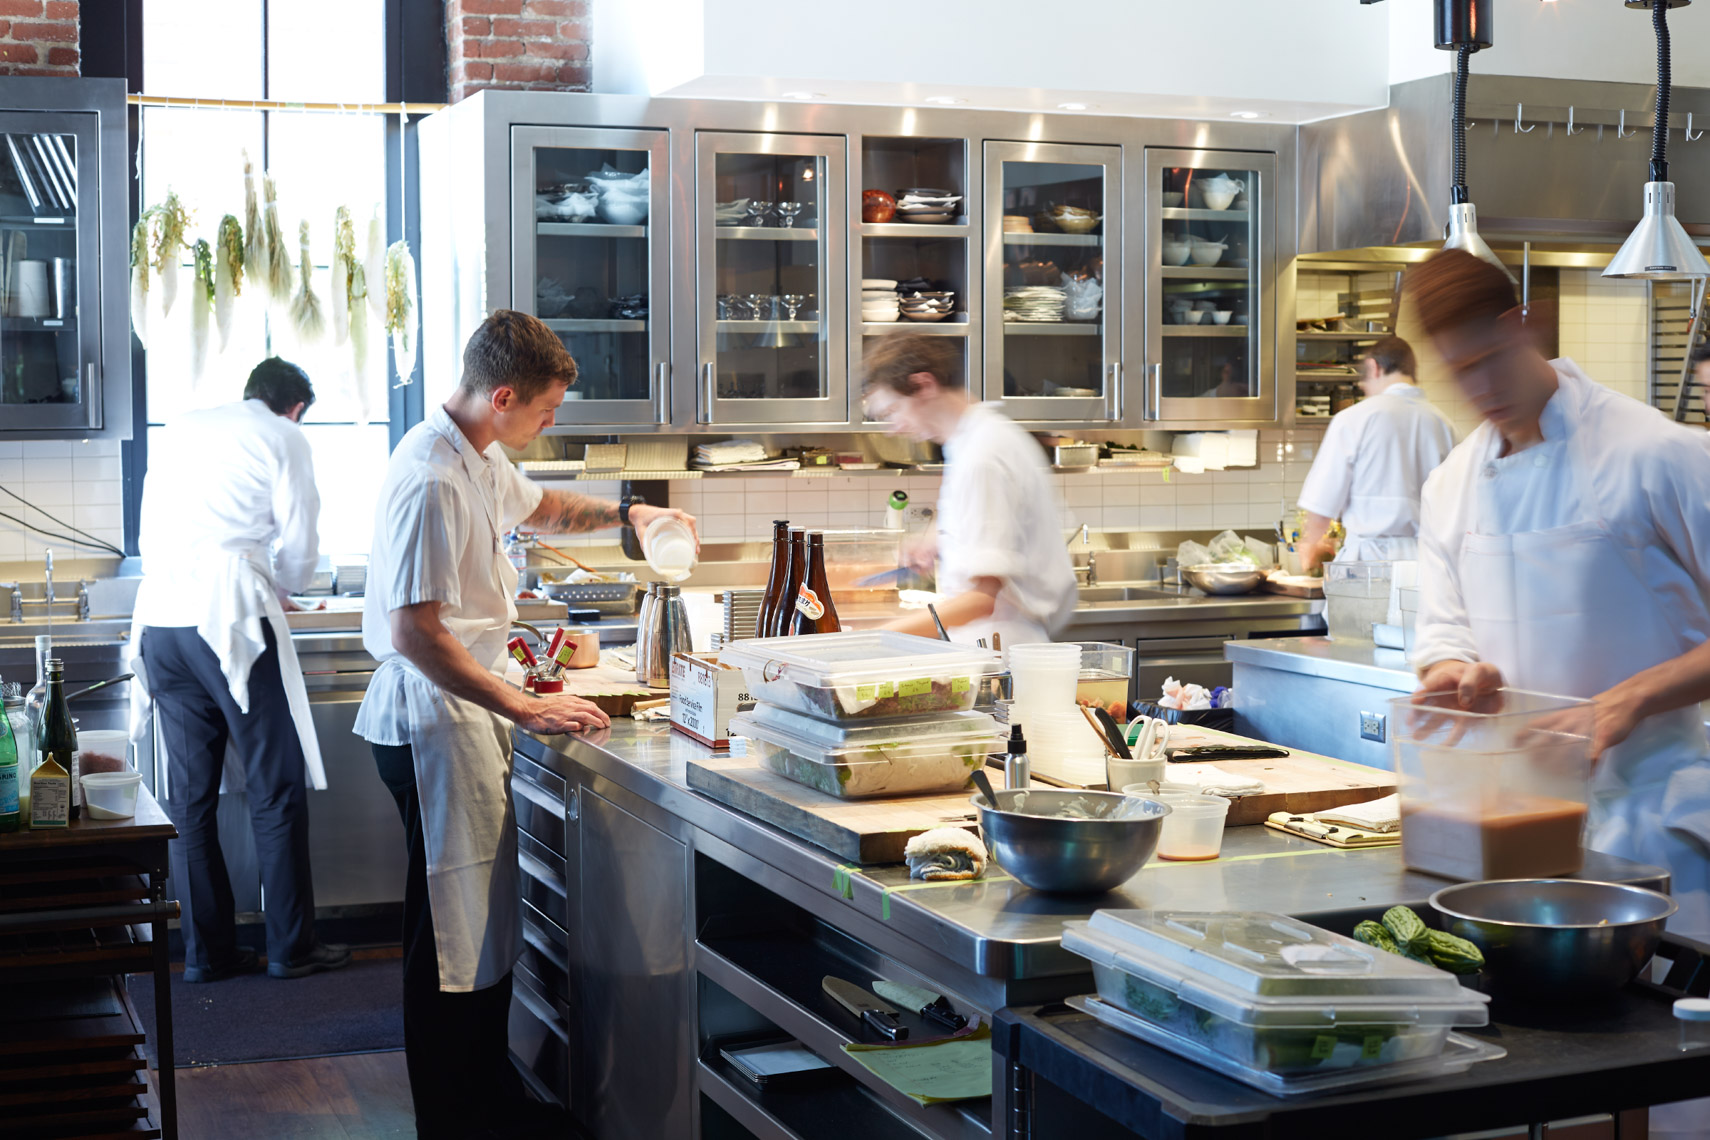 Chefs in kitchen preparing food as seen through glass entry San Francisco lifestyle photographer